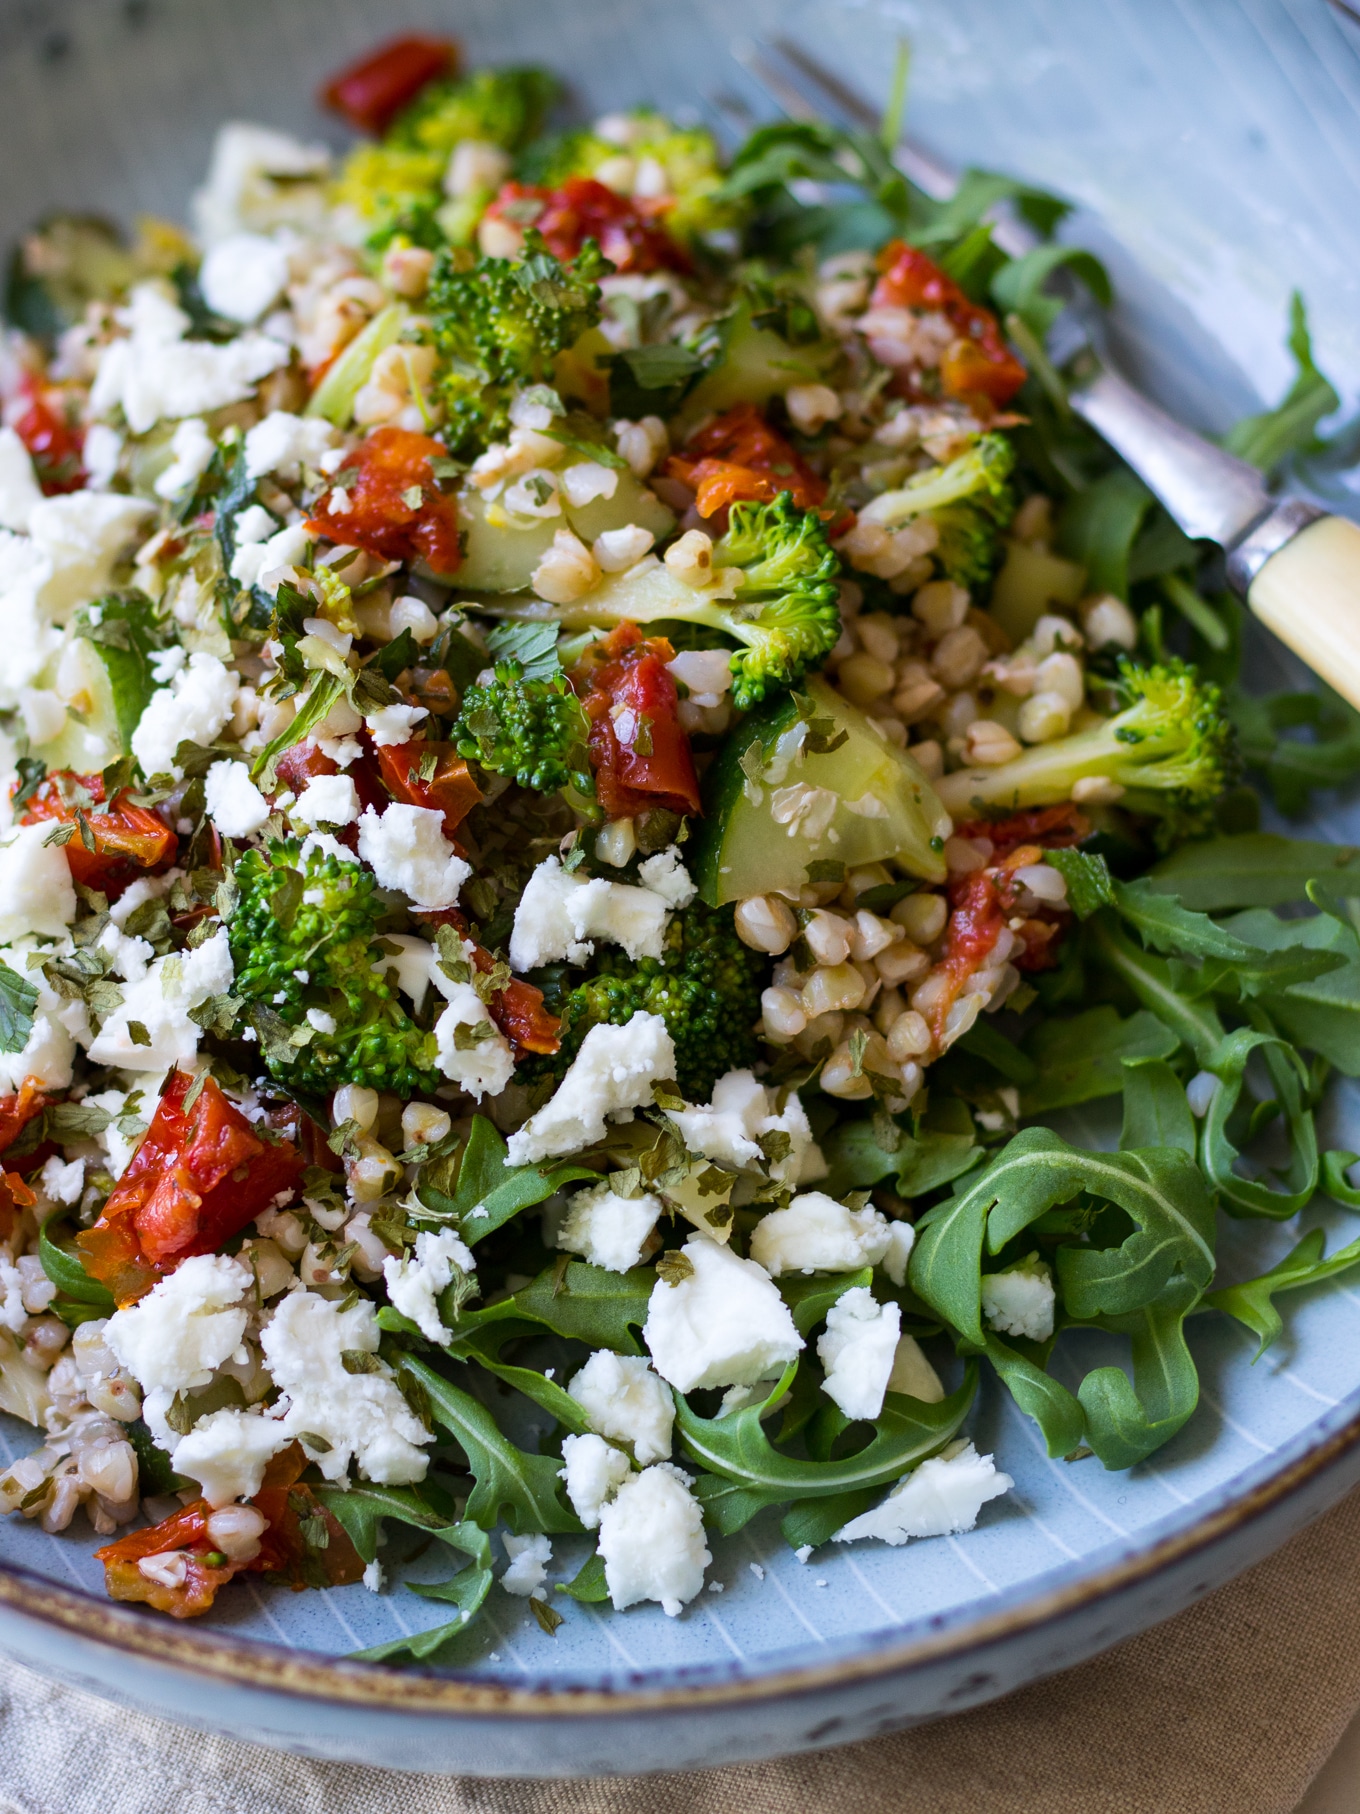 Healthy broccoli buckwheat salad with loads of fresh herbs and semi dried tomatoes for flavour! Feta optional. Easy, delicious, gluten free. #buckwheatsalad